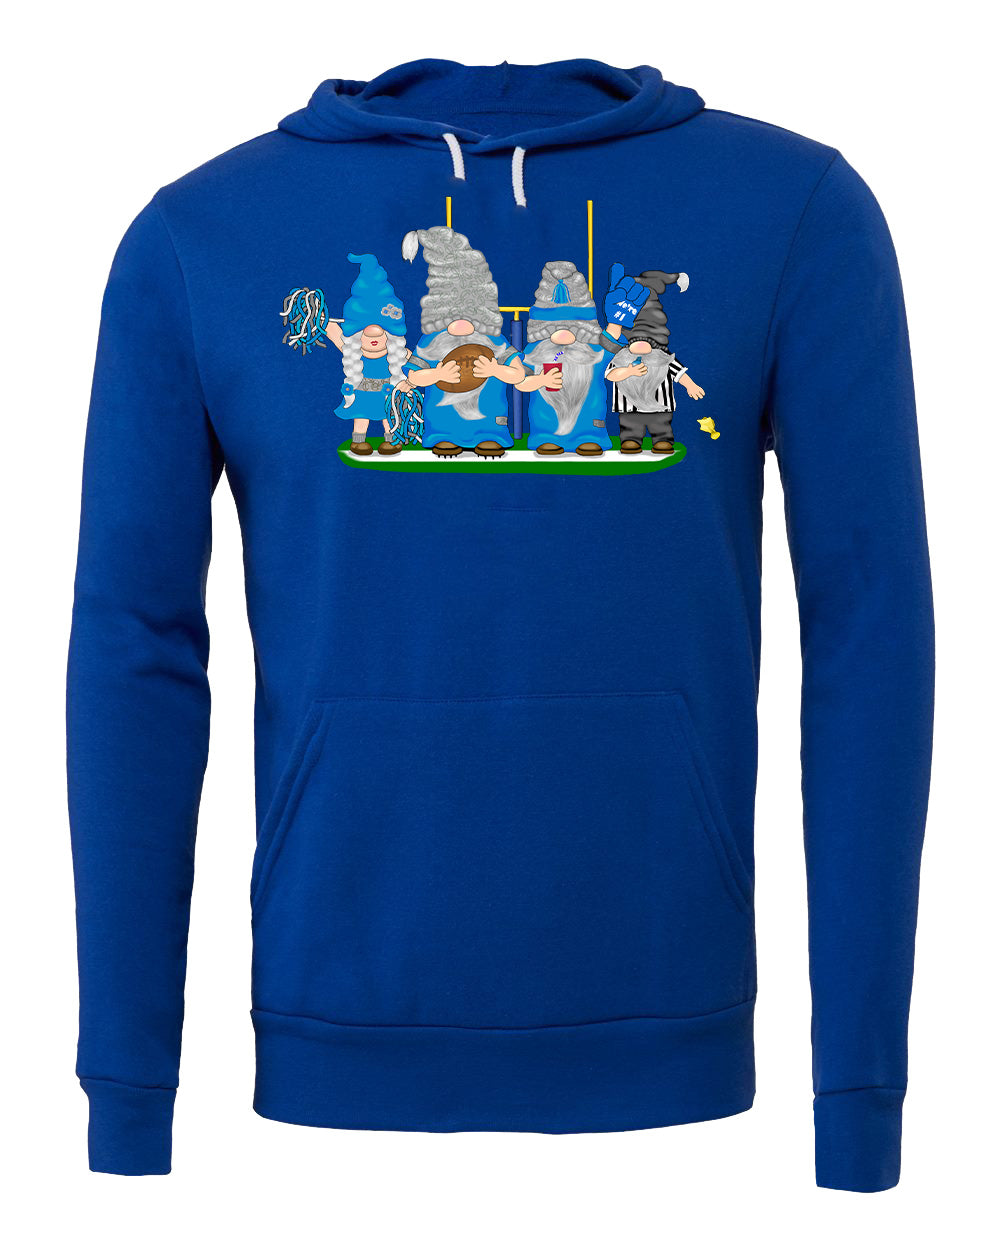 Blue & Silver Football Gnomes similar to Detroit) on Unisex Hoodie